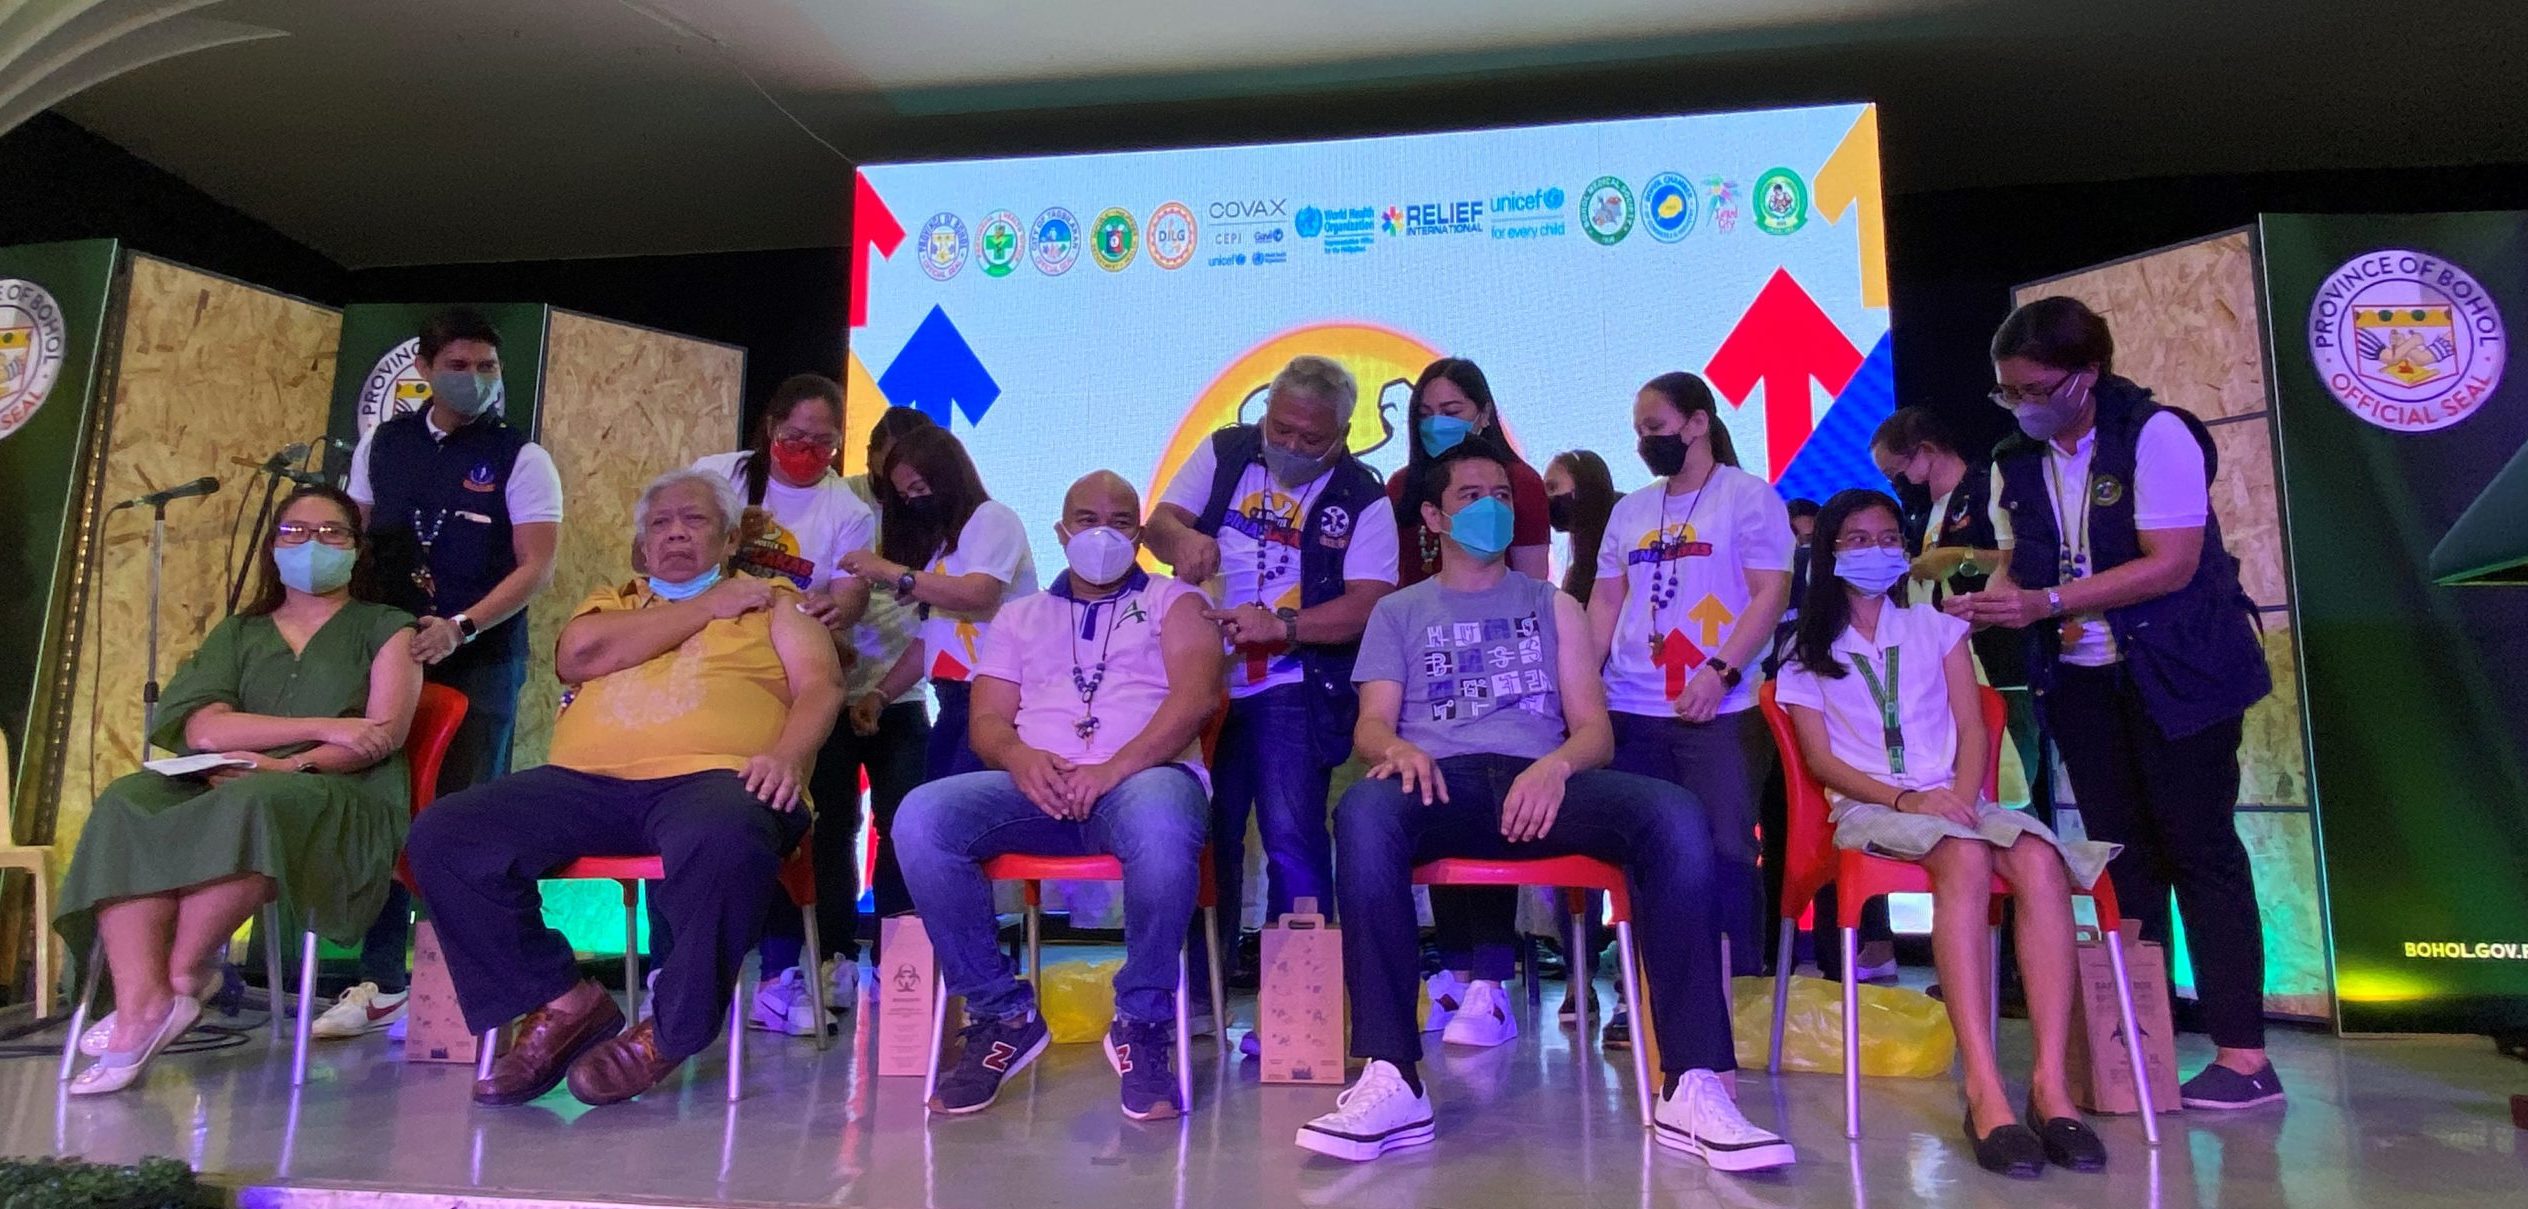 Bohol officials receive their COVID-19 booster shots during the launching of the "PinasLakas" booster vaccination drive